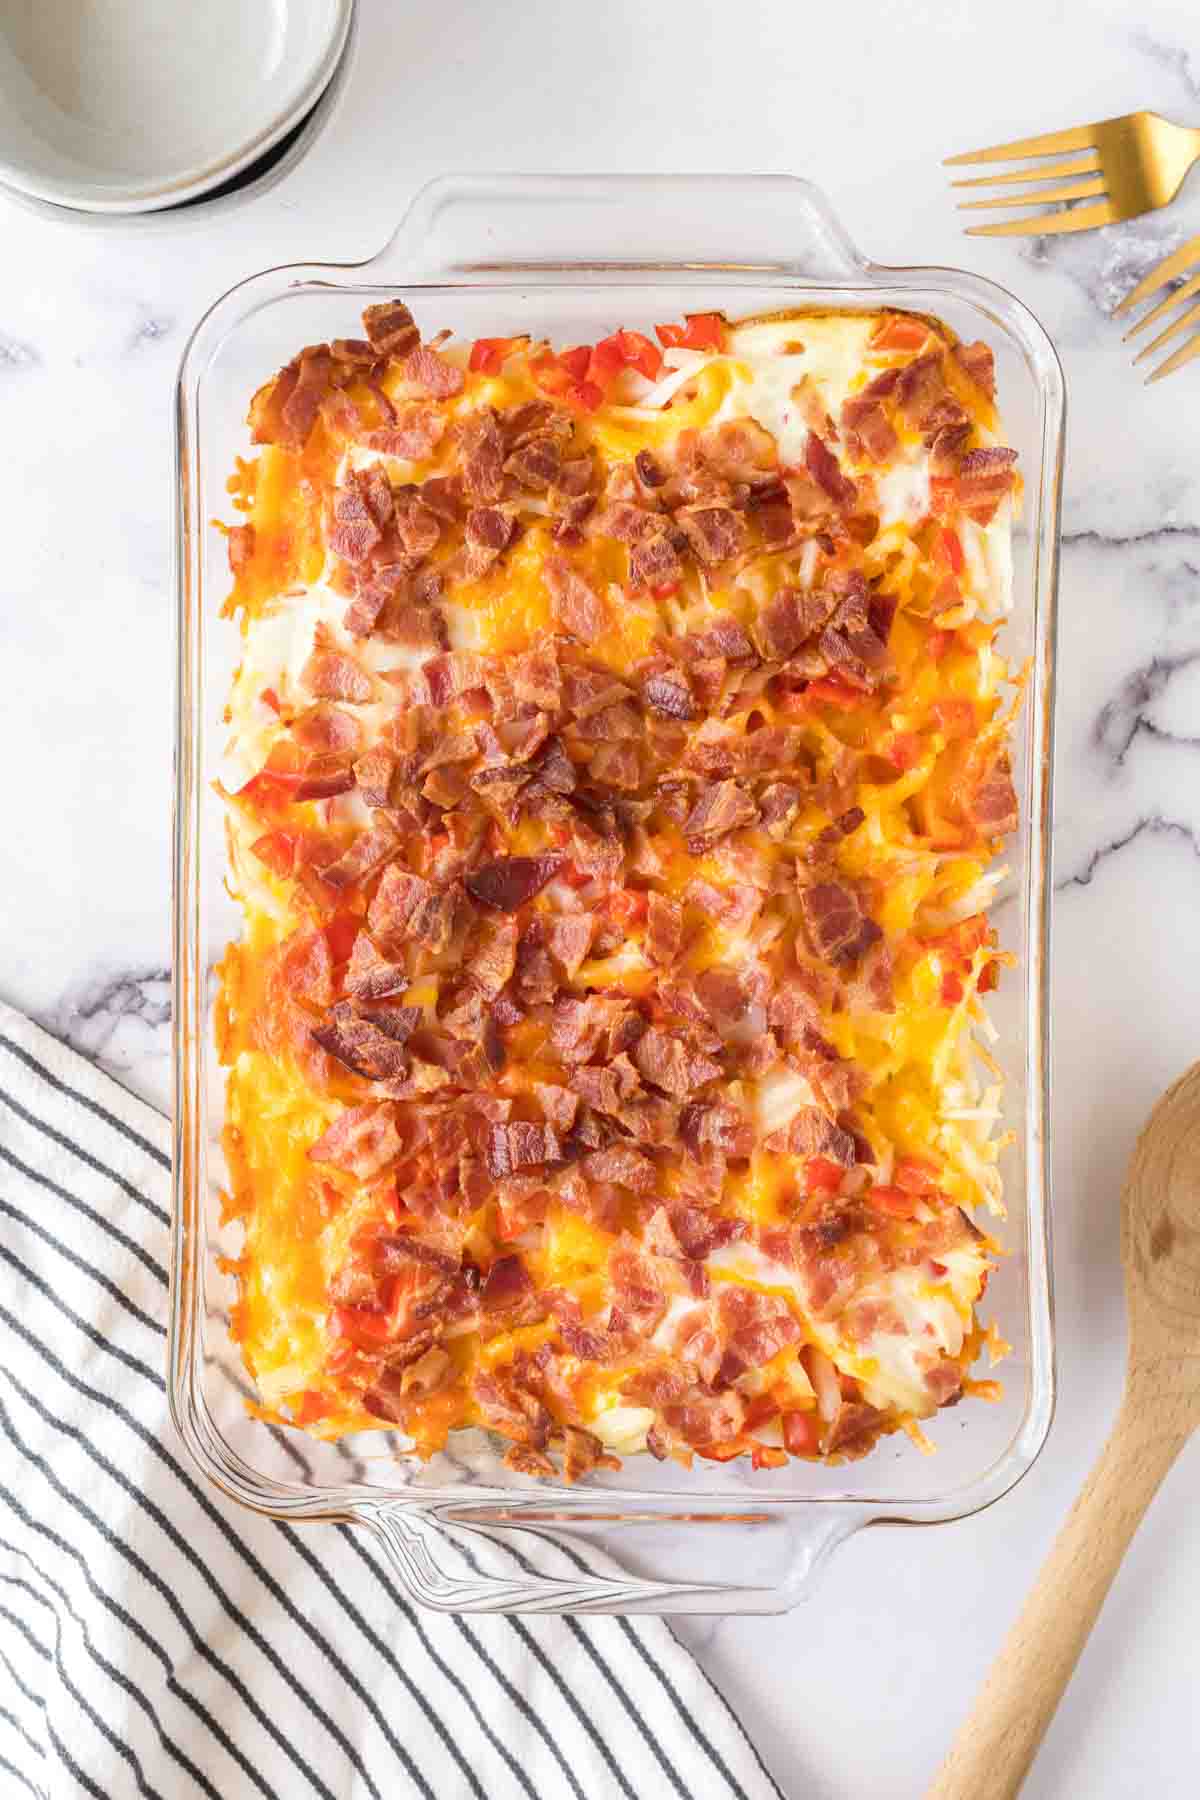 baked in a clear rectangle baking dish, hash brown breakfast casserole with melted cheese and bacon on top